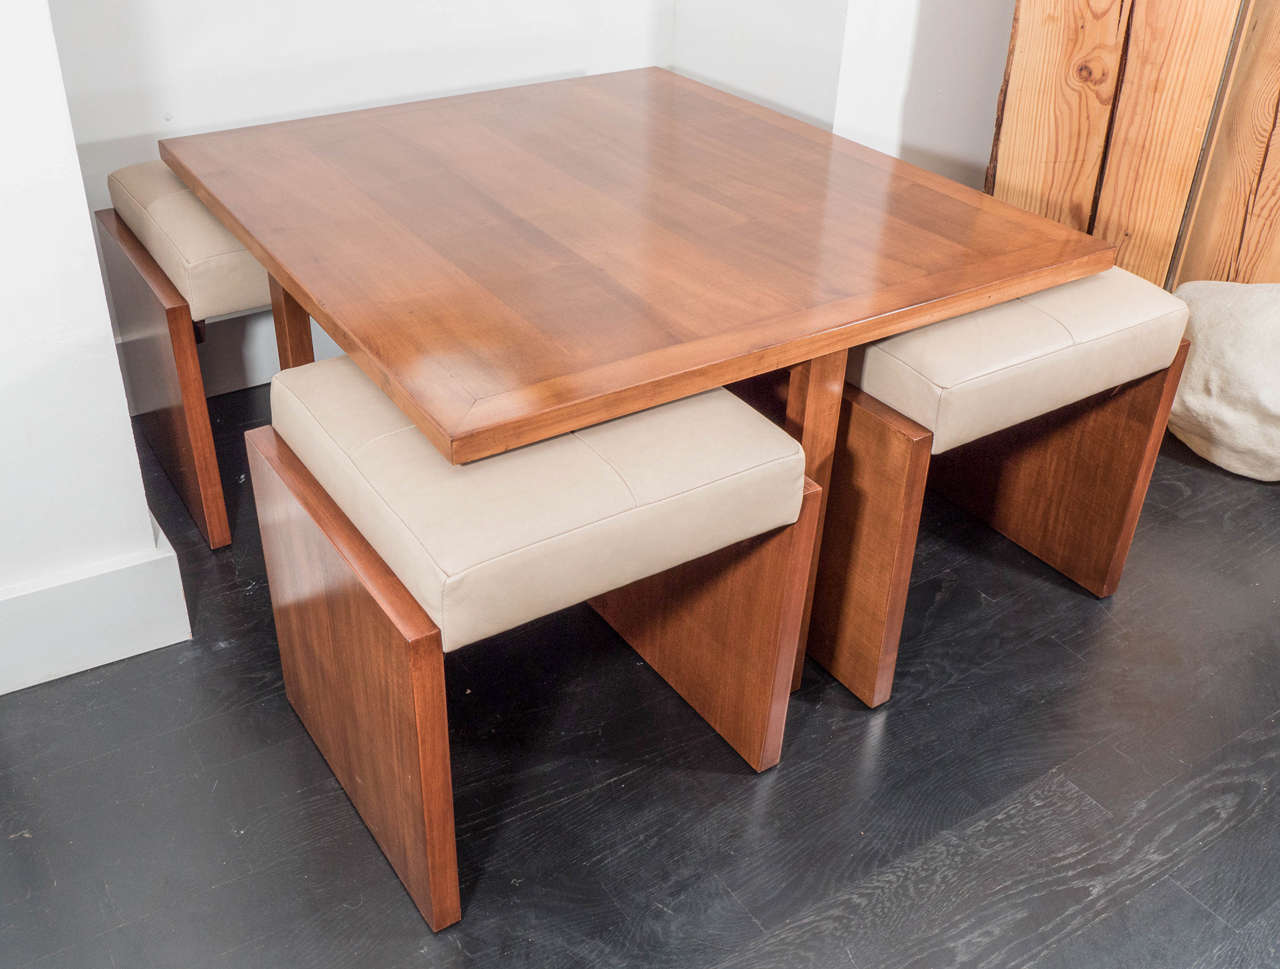 A set of four mahogany benches with leather seats rest under a matching table. Newly upholstered seats and refinished bases. The benches measure H 18